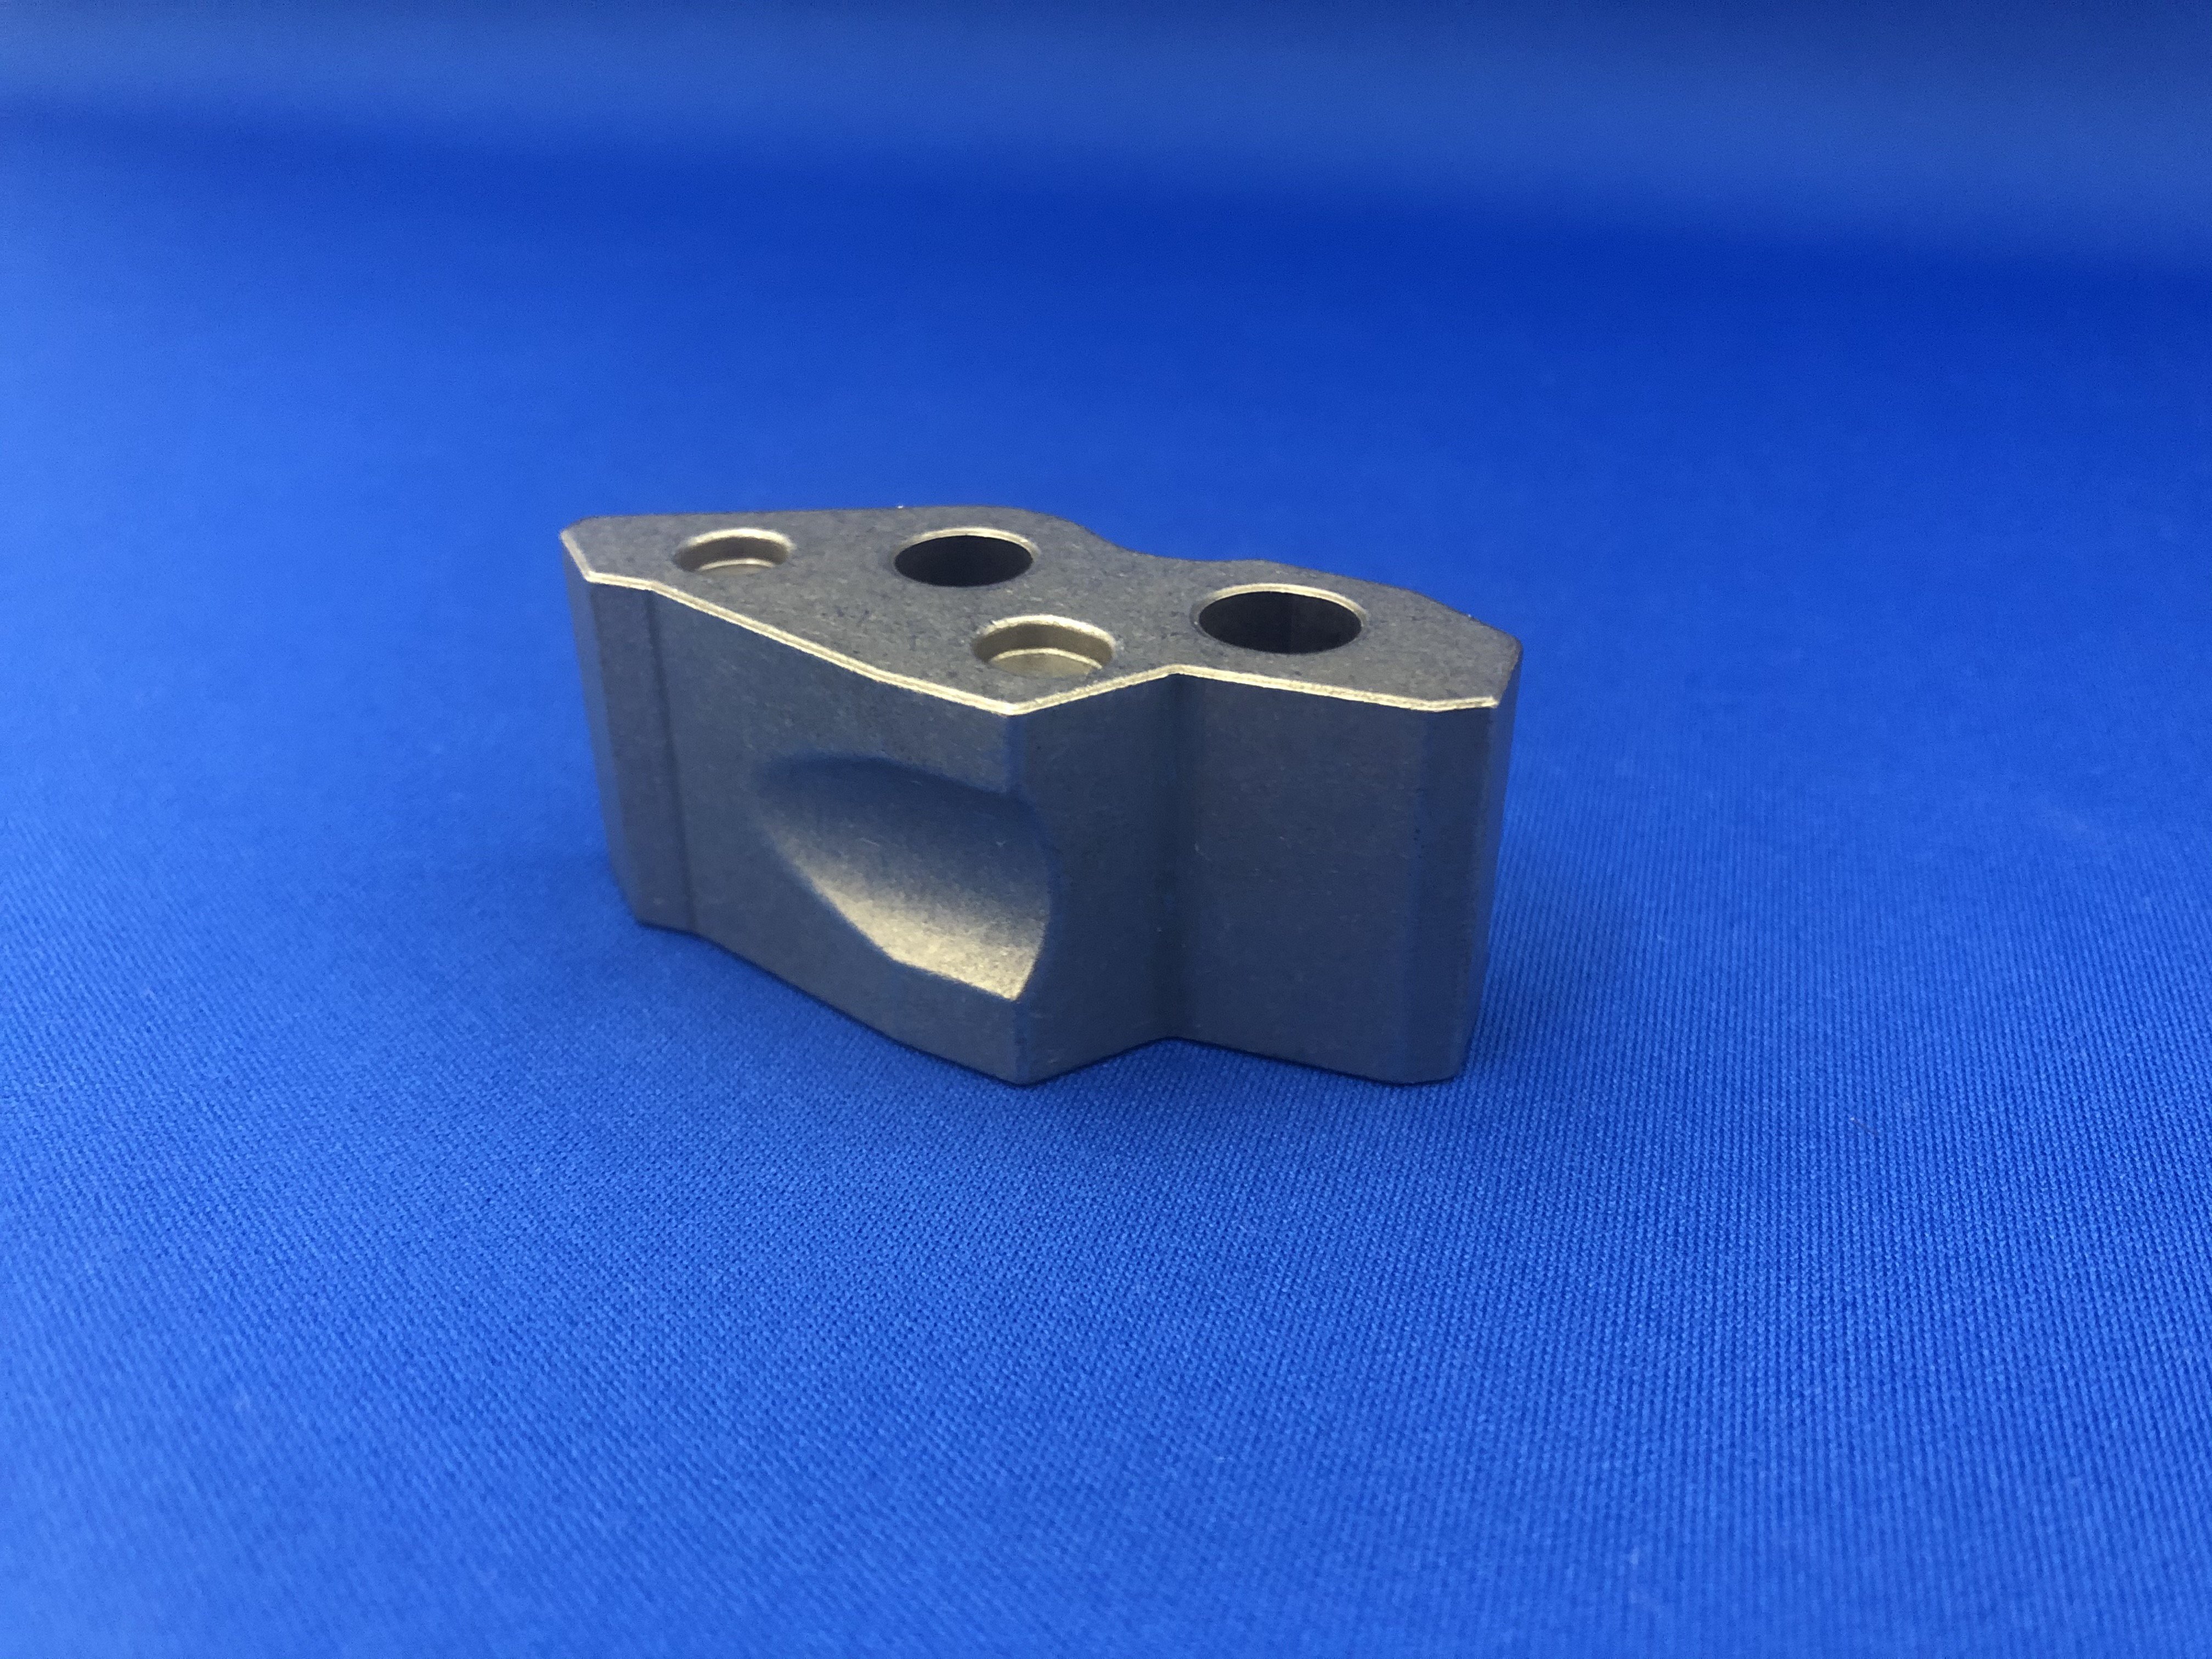 Cost reduction by making curvature grooves for parking lock parts using conventional press mechanism